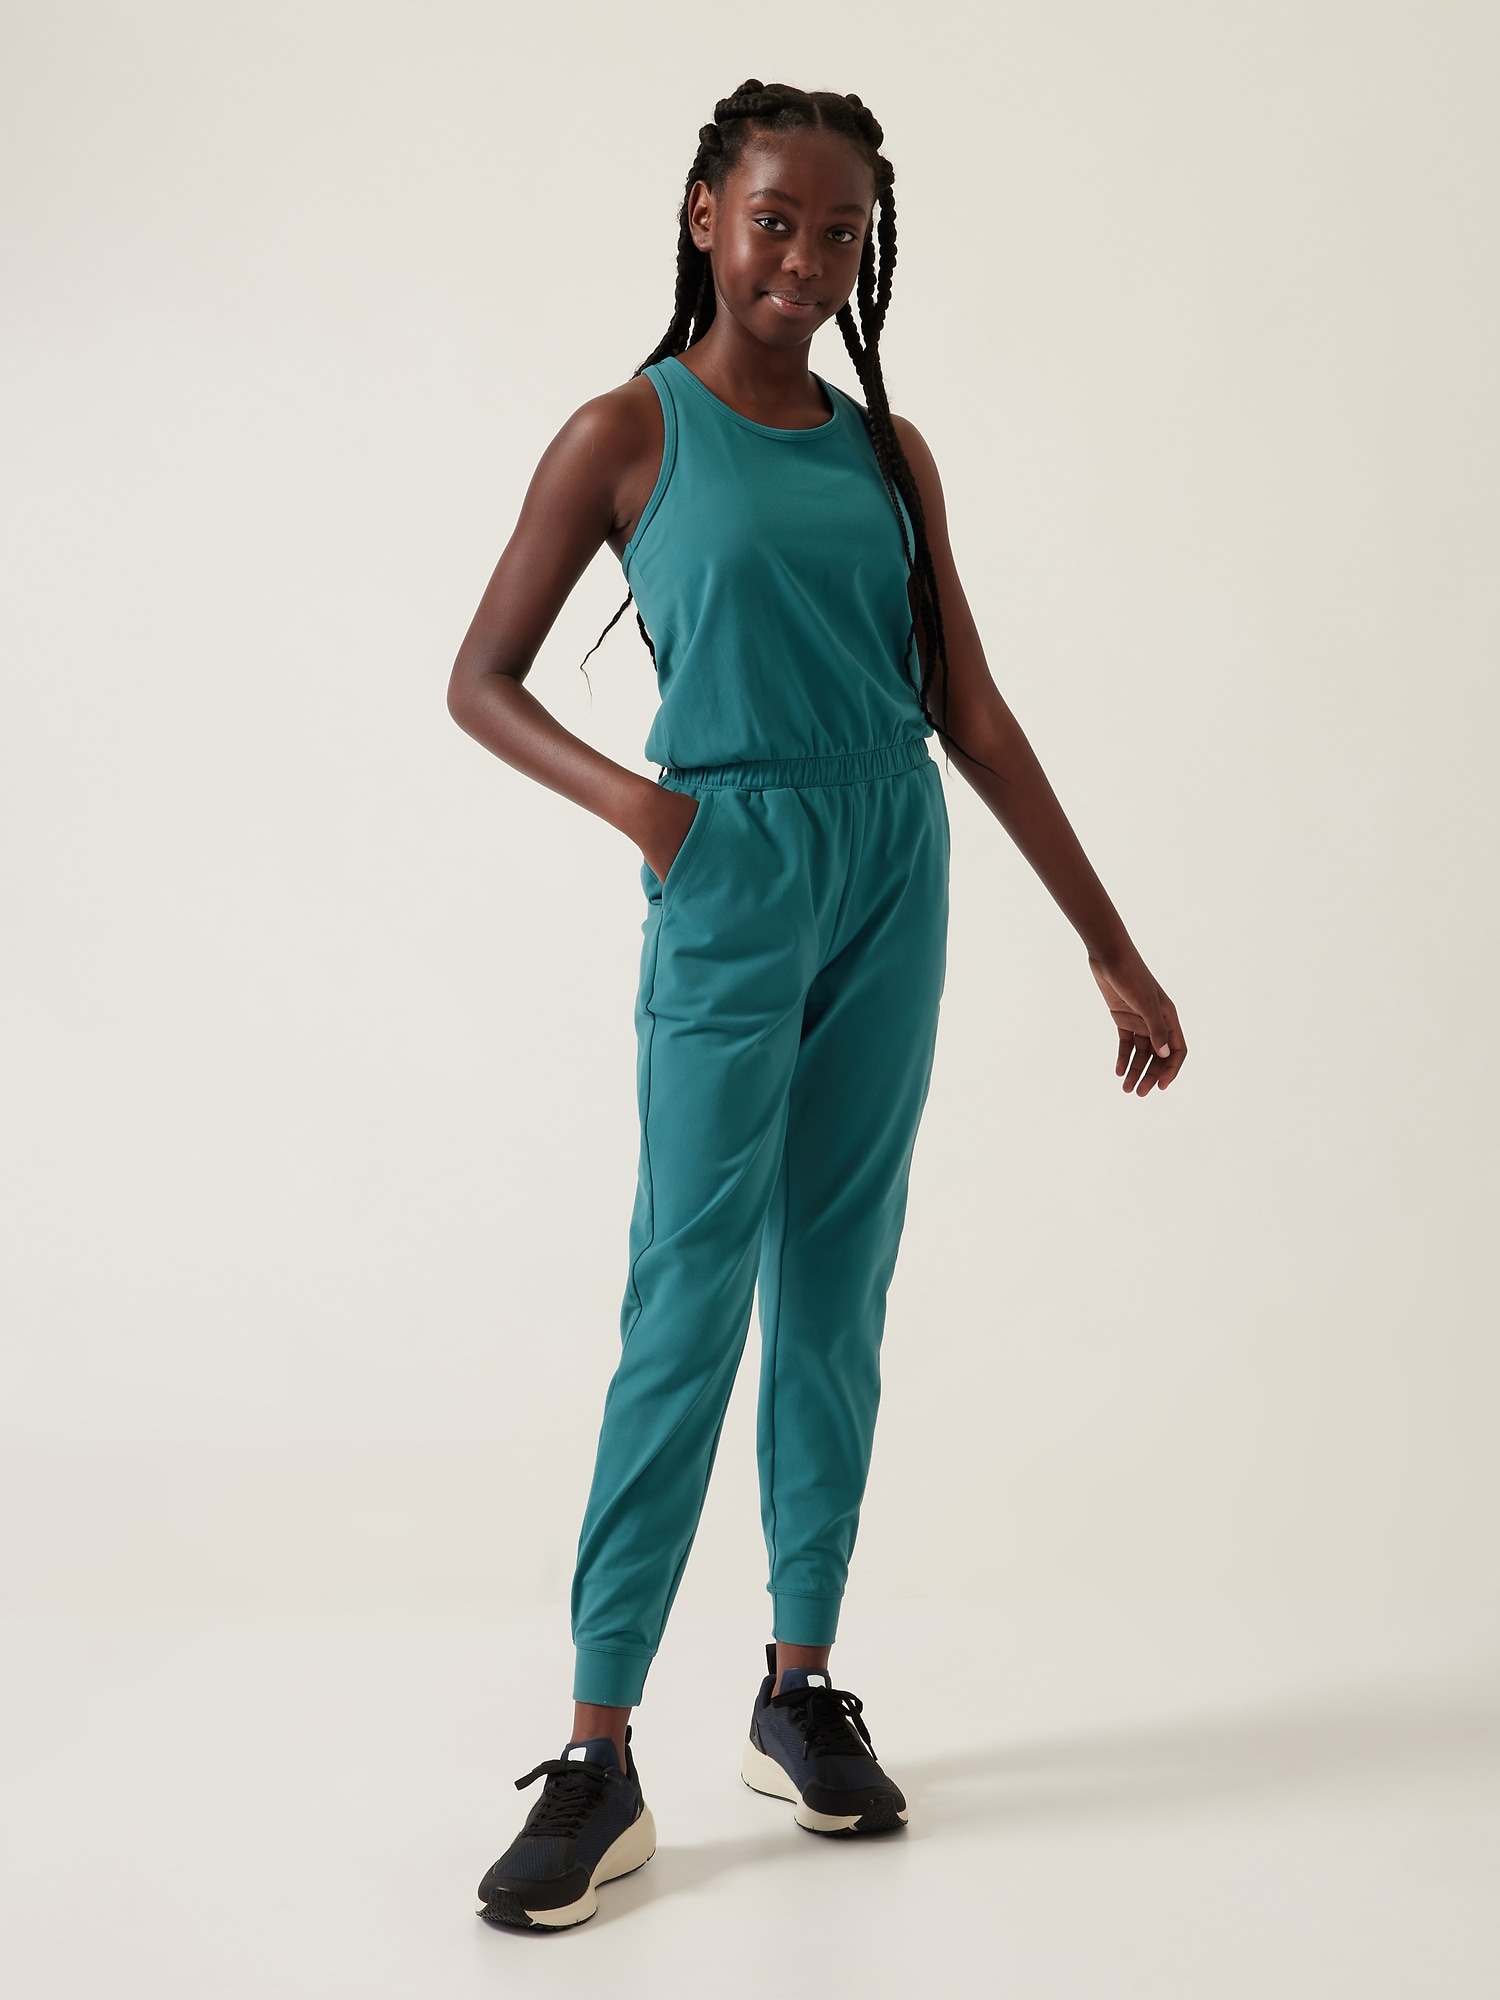 Athleta Girl Hop Skip and a Jumpsuit green. 1